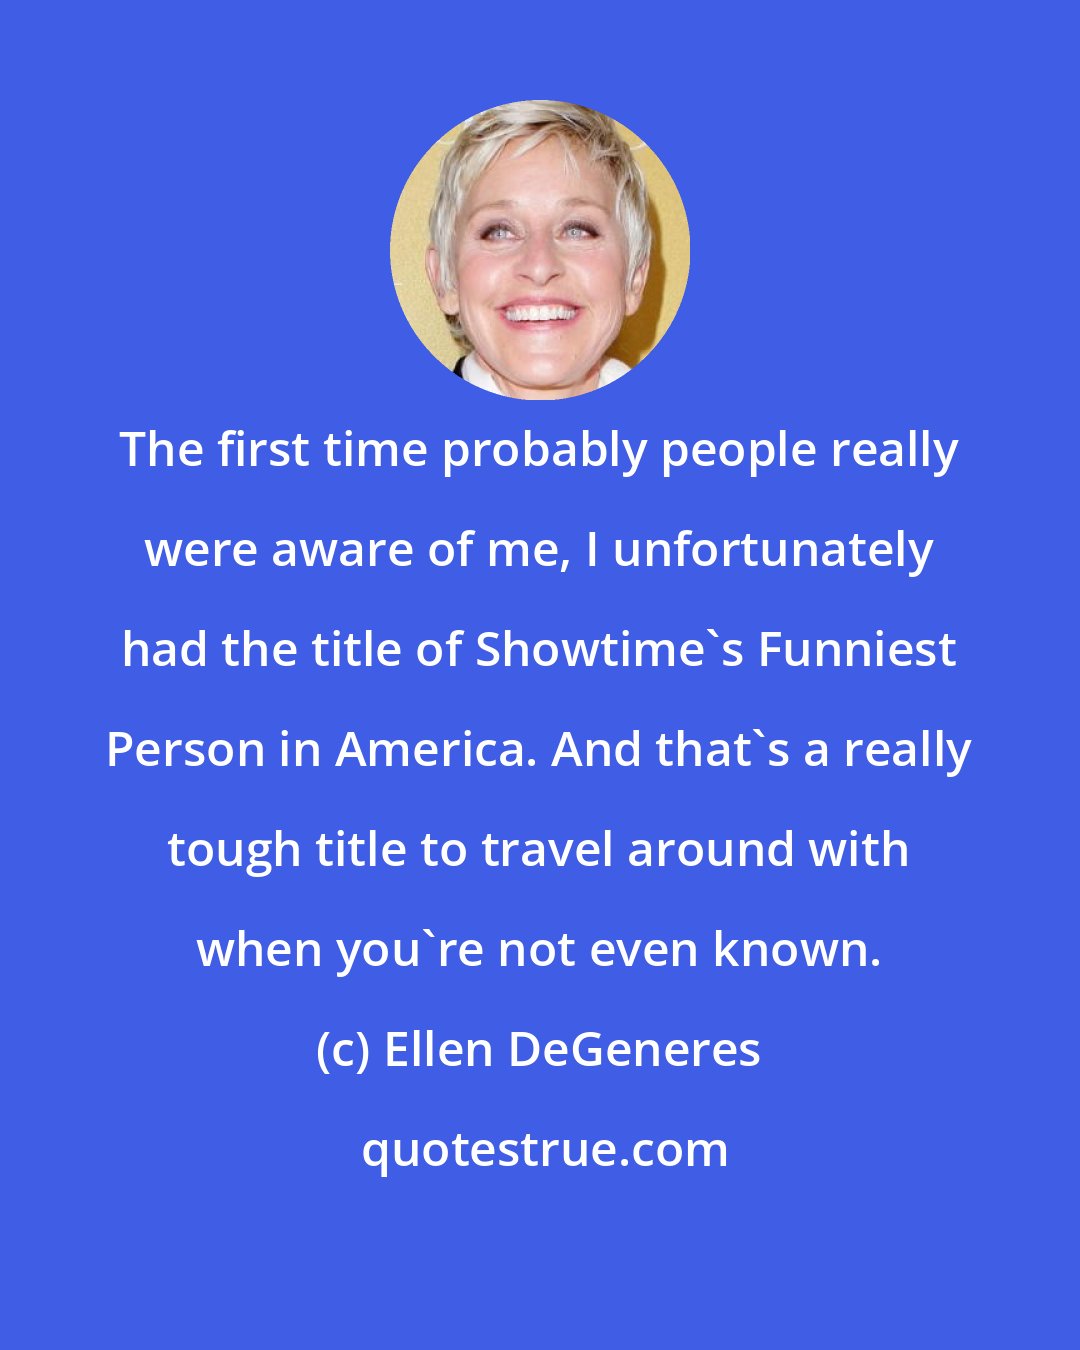 Ellen DeGeneres: The first time probably people really were aware of me, I unfortunately had the title of Showtime's Funniest Person in America. And that's a really tough title to travel around with when you're not even known.